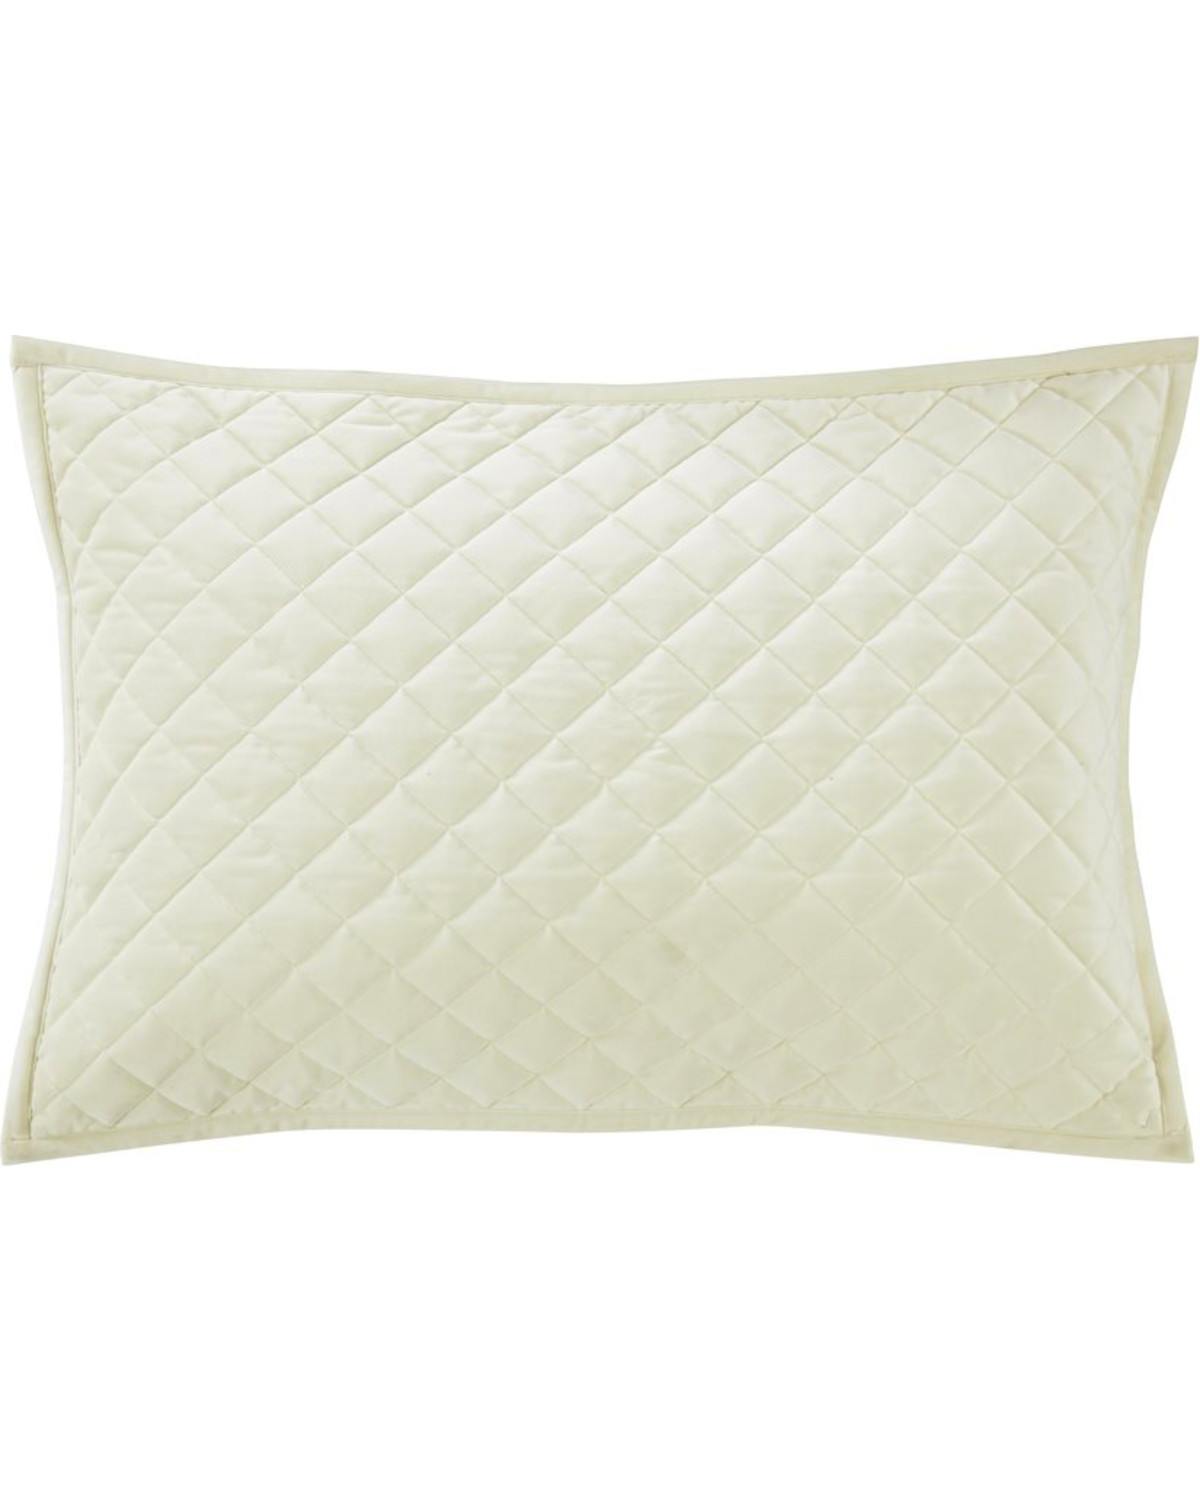 HiEnd Accents King Cream Diamond Quilted Shams